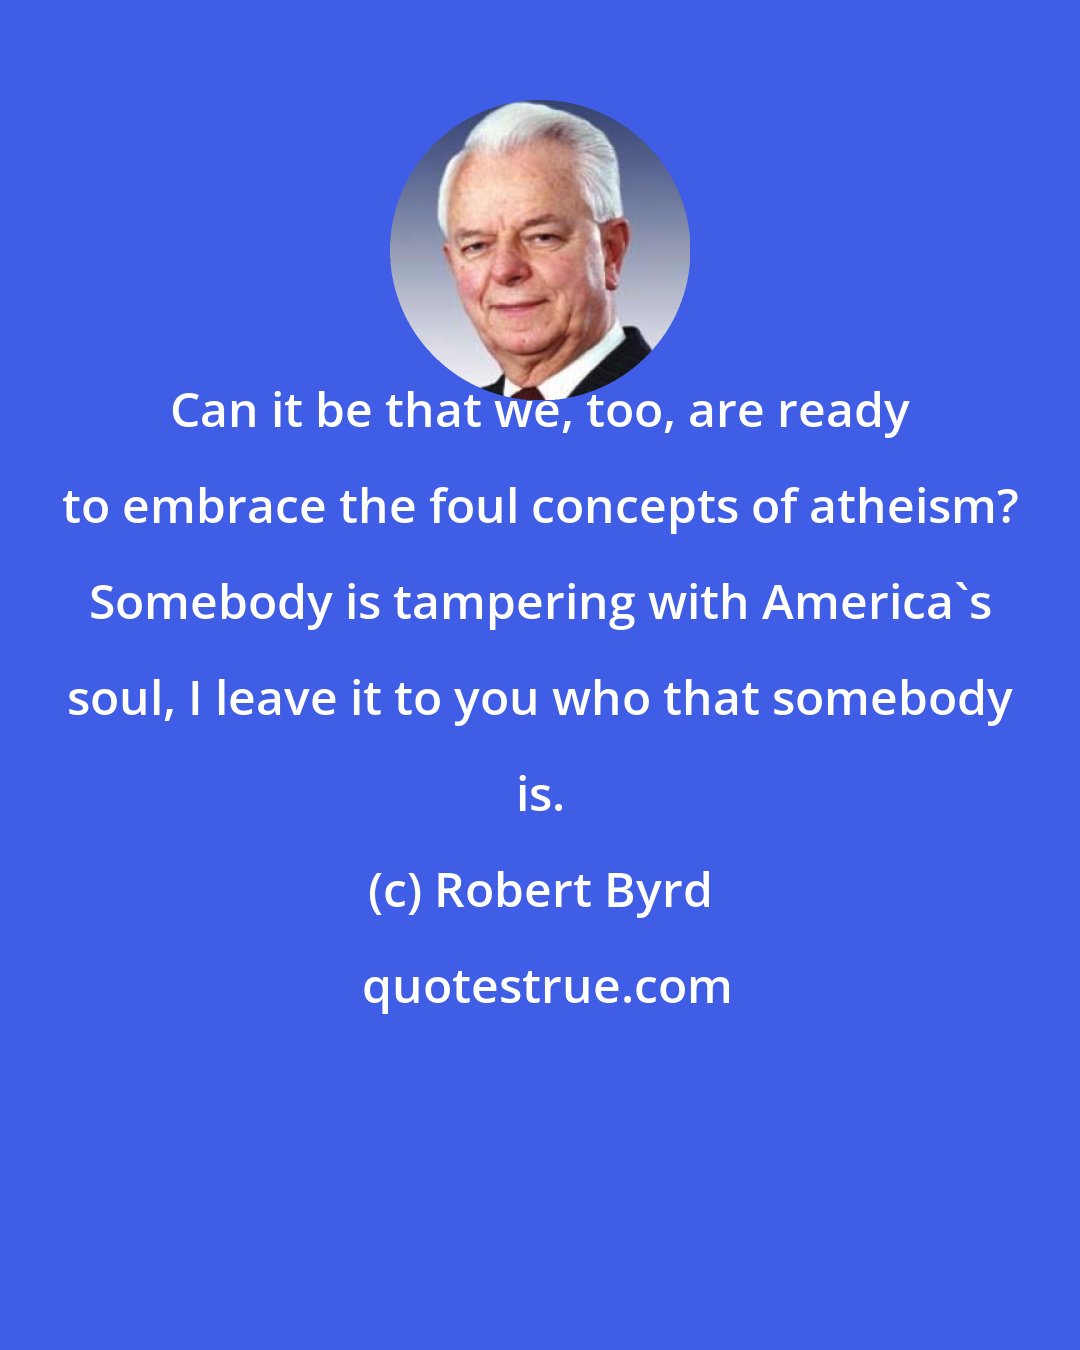 Robert Byrd: Can it be that we, too, are ready to embrace the foul concepts of atheism? Somebody is tampering with America's soul, I leave it to you who that somebody is.